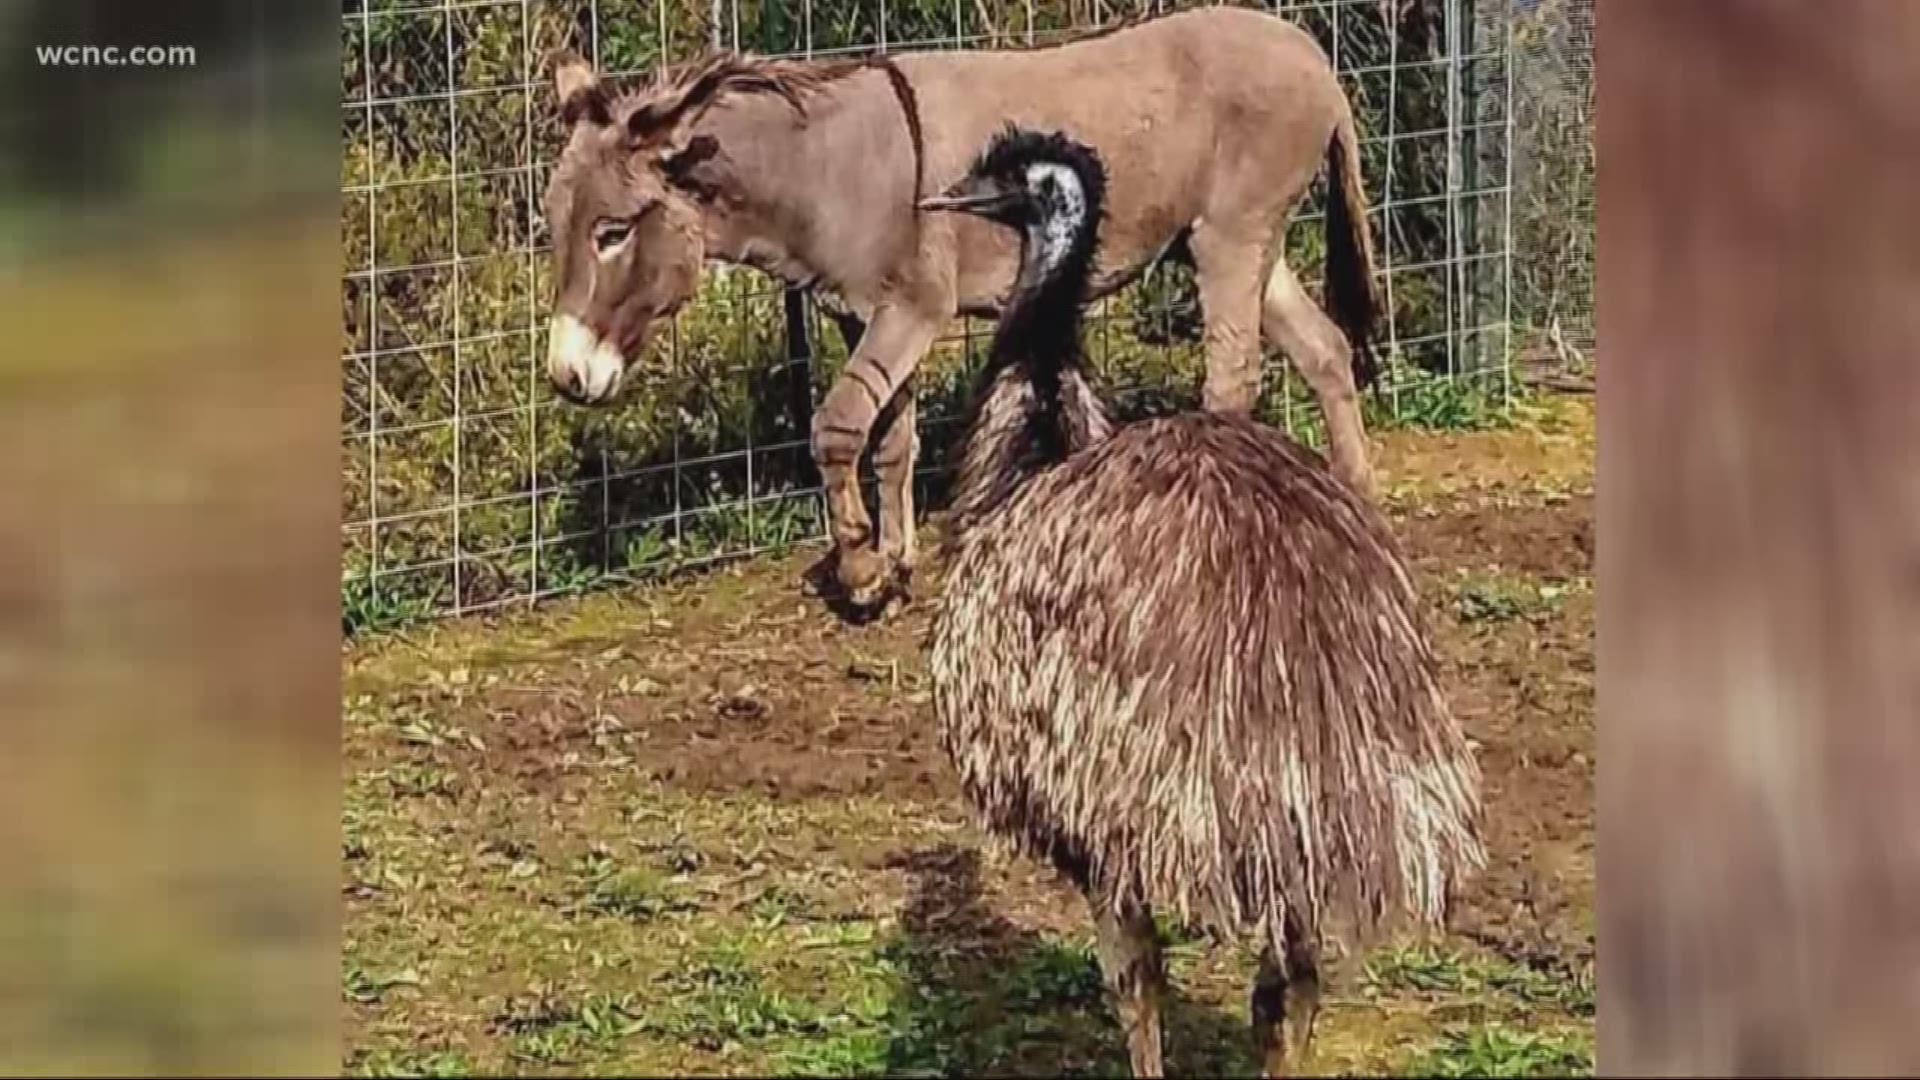 Actor Jeffrey Dean Morgan stepped in to save an inseparable emu and donkey from Carolina Waterfowl in Union County.